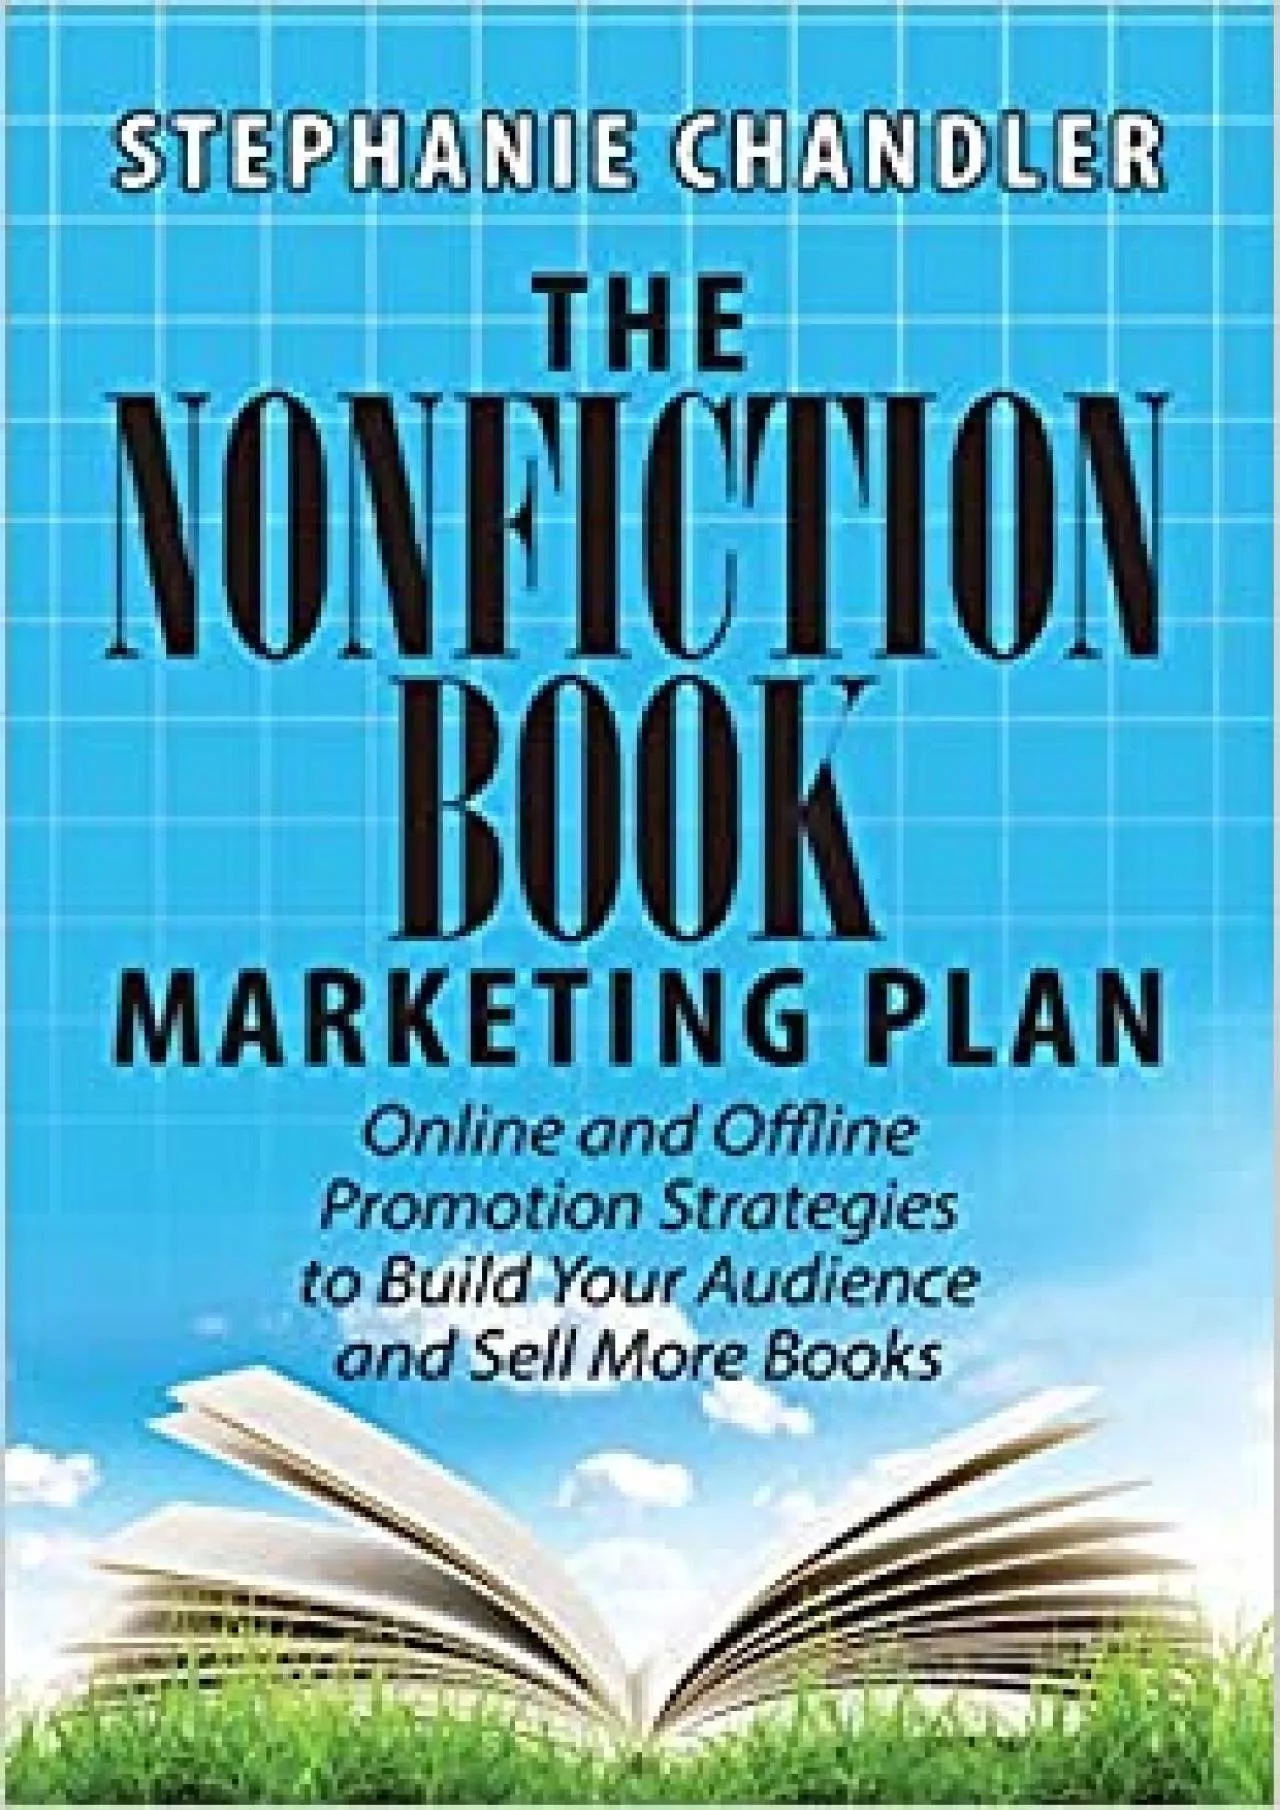 The Nonfiction Book Marketing Plan Online and Offline Promotion Strategies to Build Your